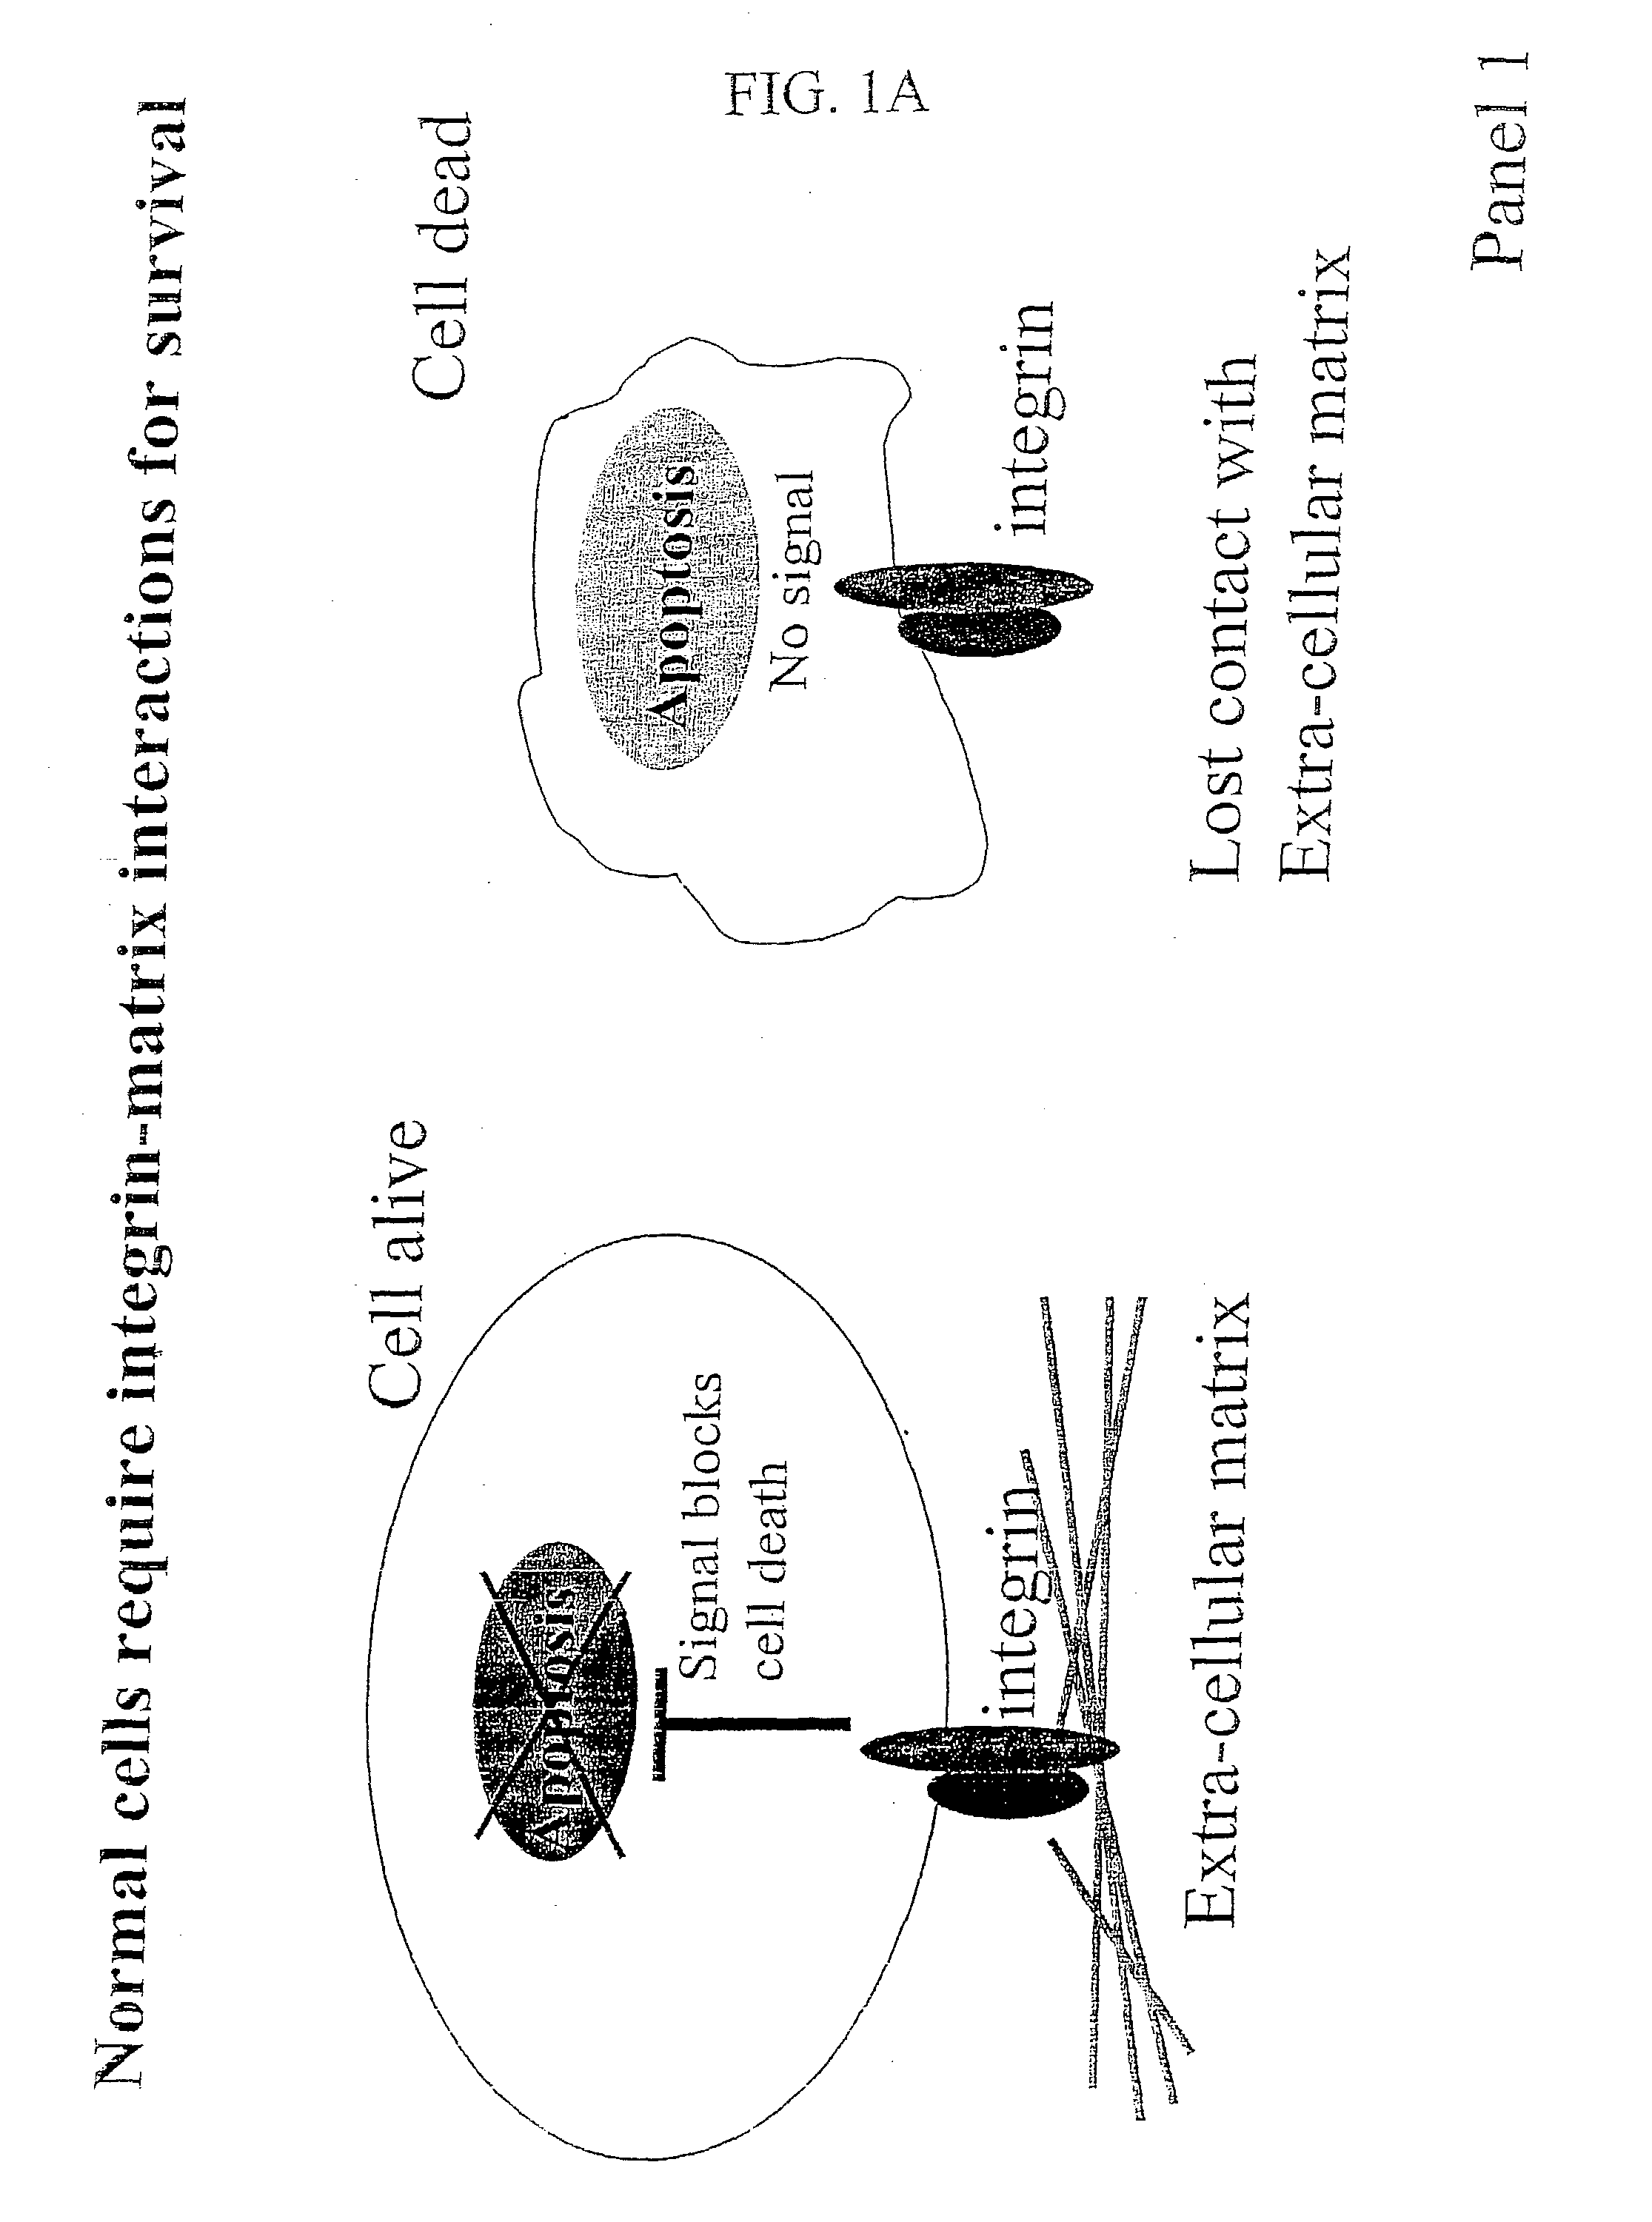 Compositions that inhibit proliferation of cancer cells